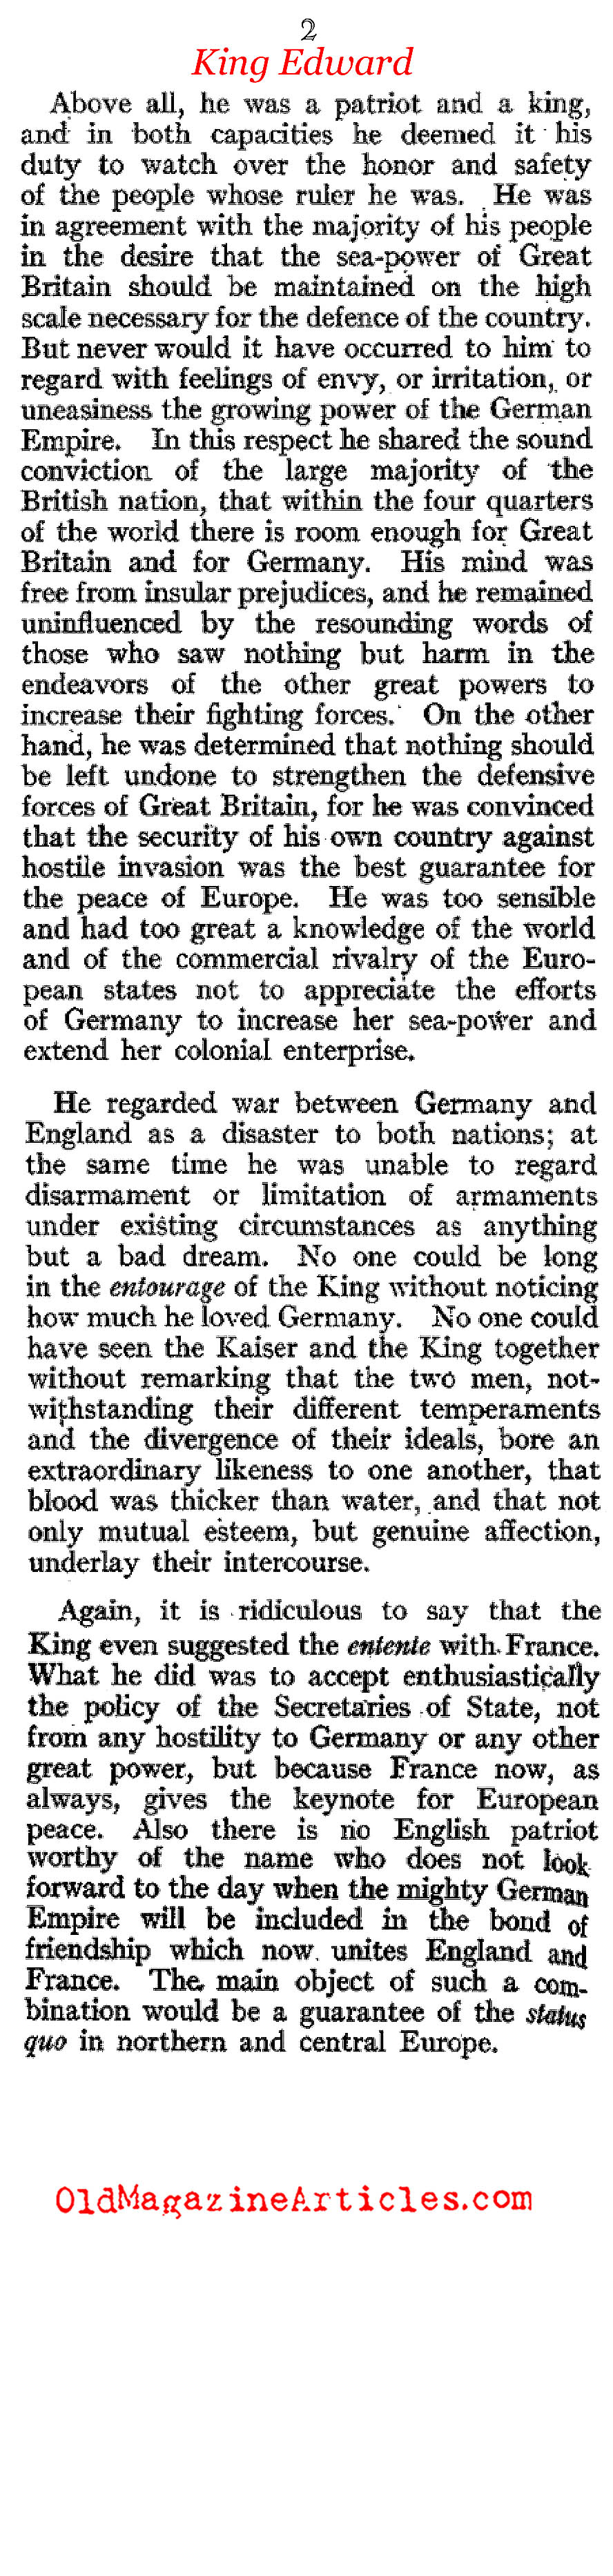 King Edward VII and Germany (Review of Reviews, 1910)